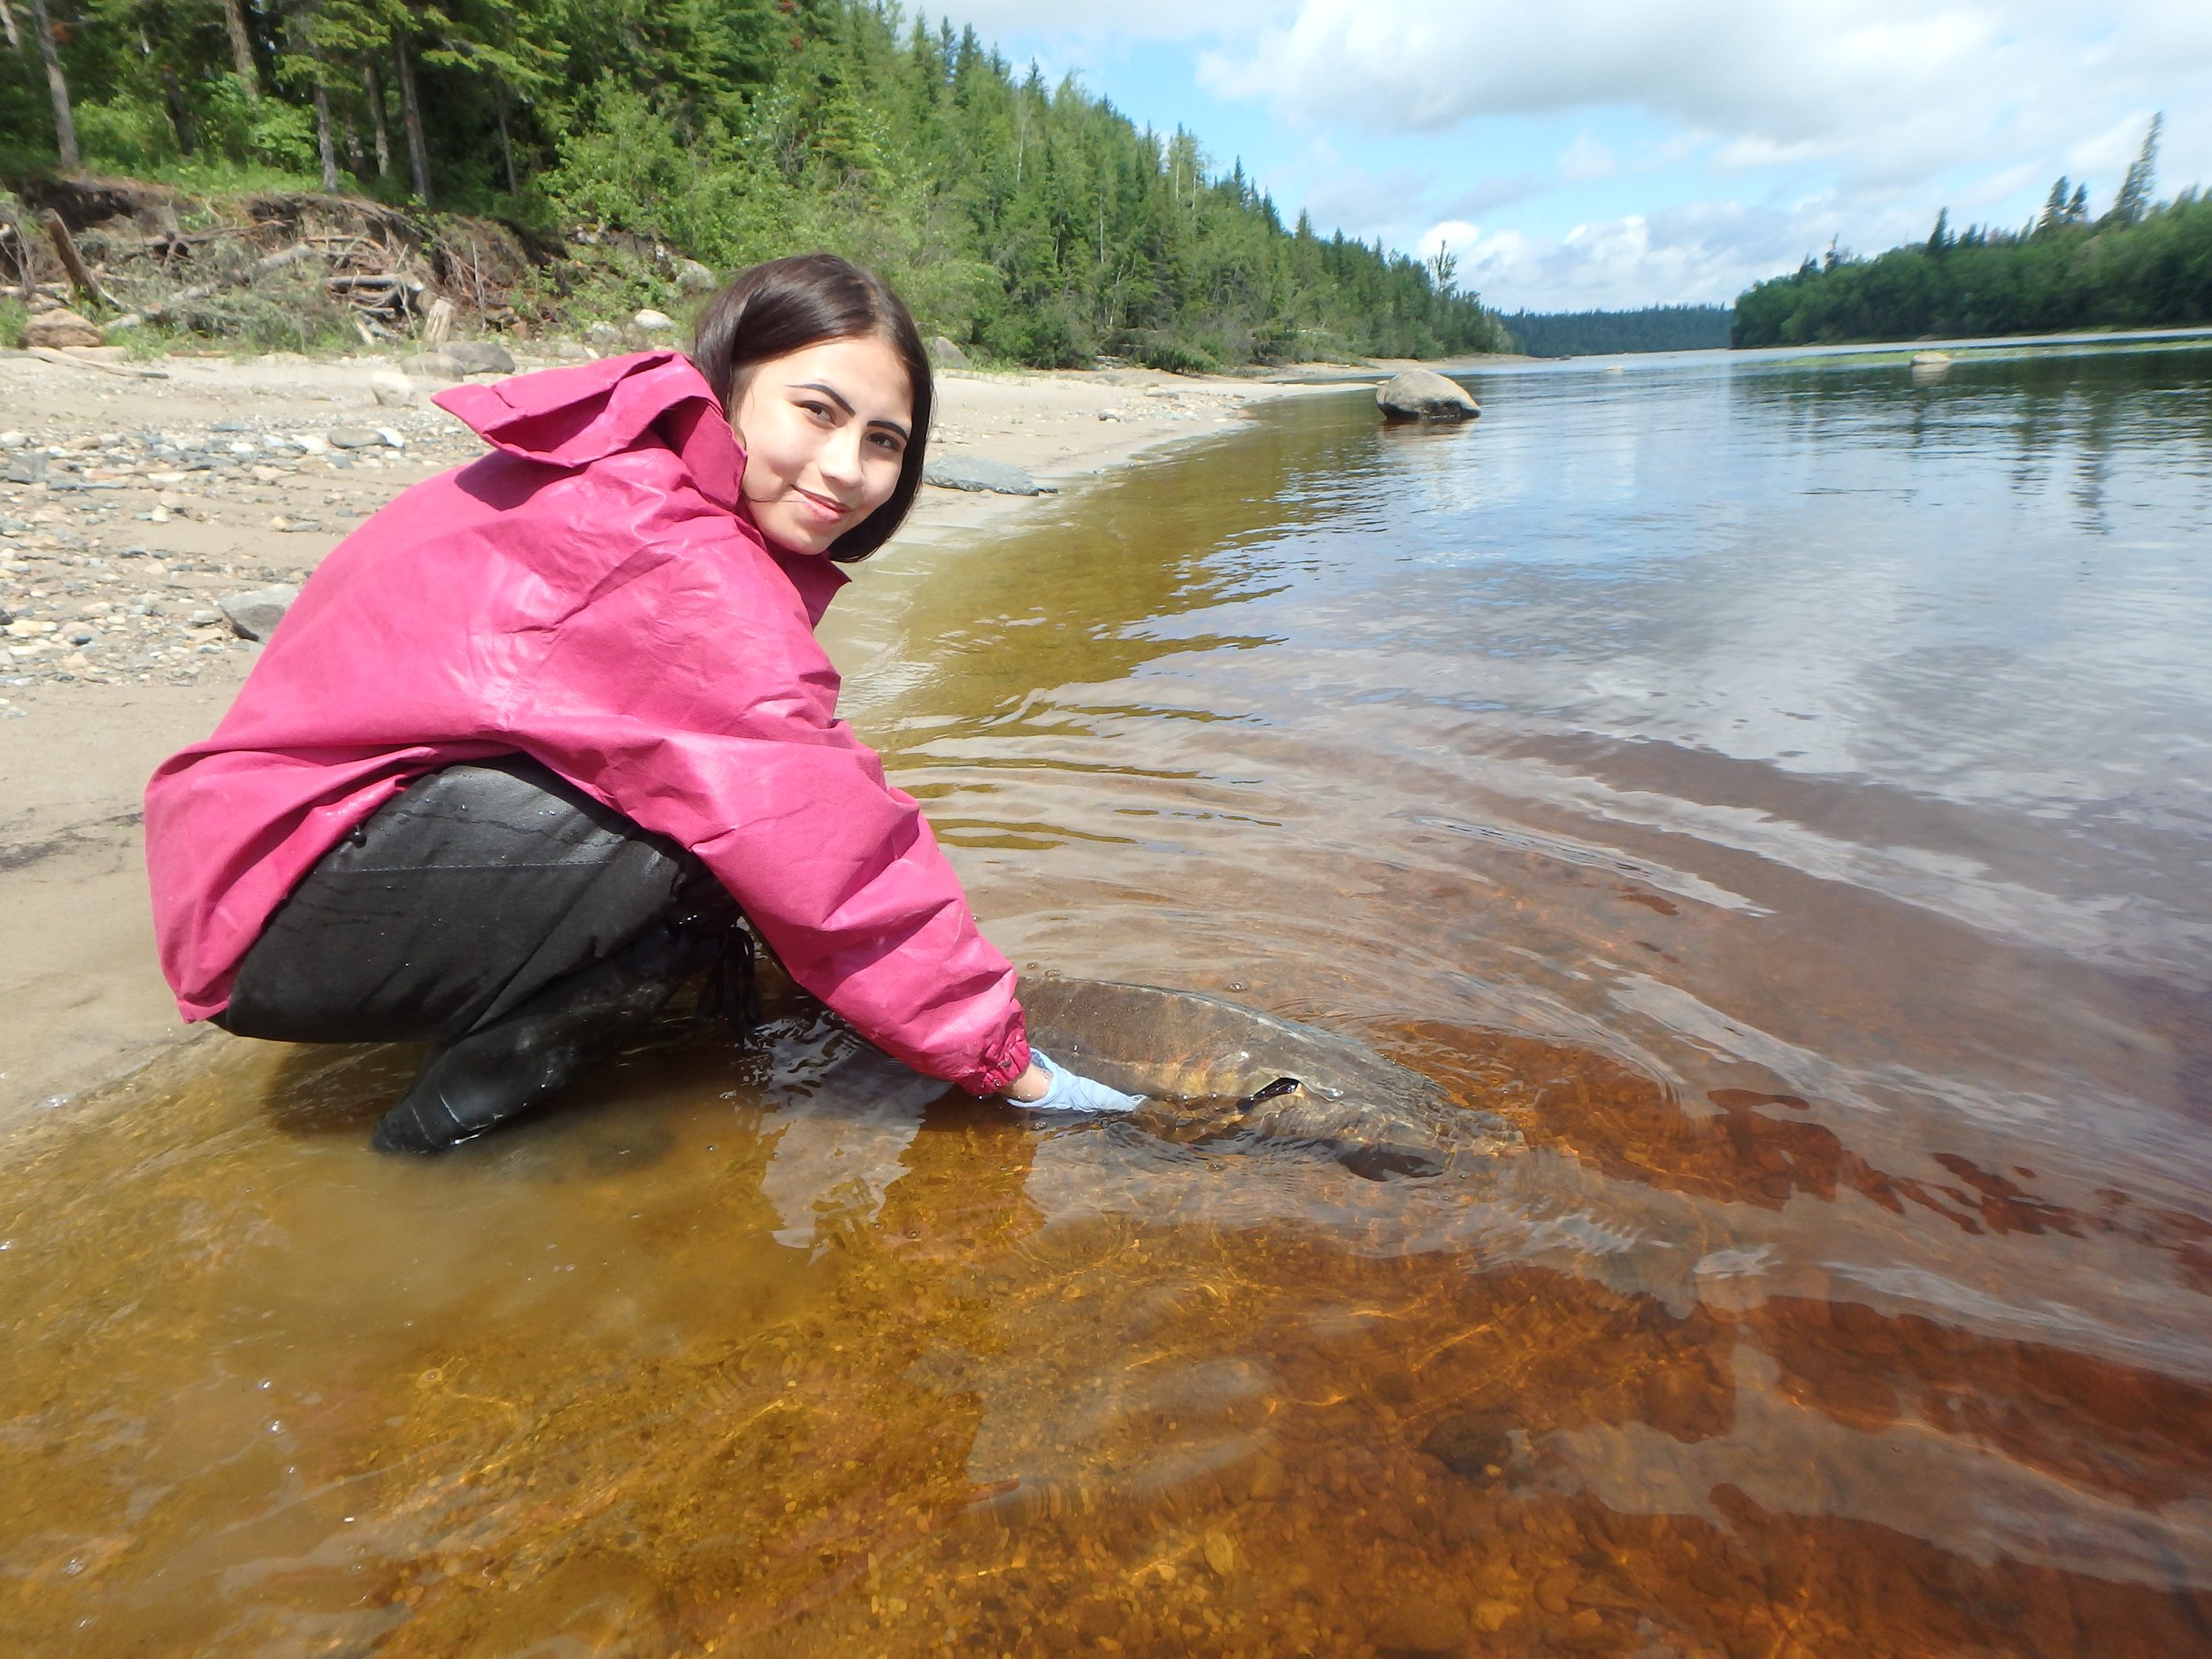 Ocean Skye Phillips (MCFN youth) has been a part of our lake sturgeon youth program since 2019. Here she releases a tagged lake sturgeon who will tell us how and where lake sturgeon use this river.